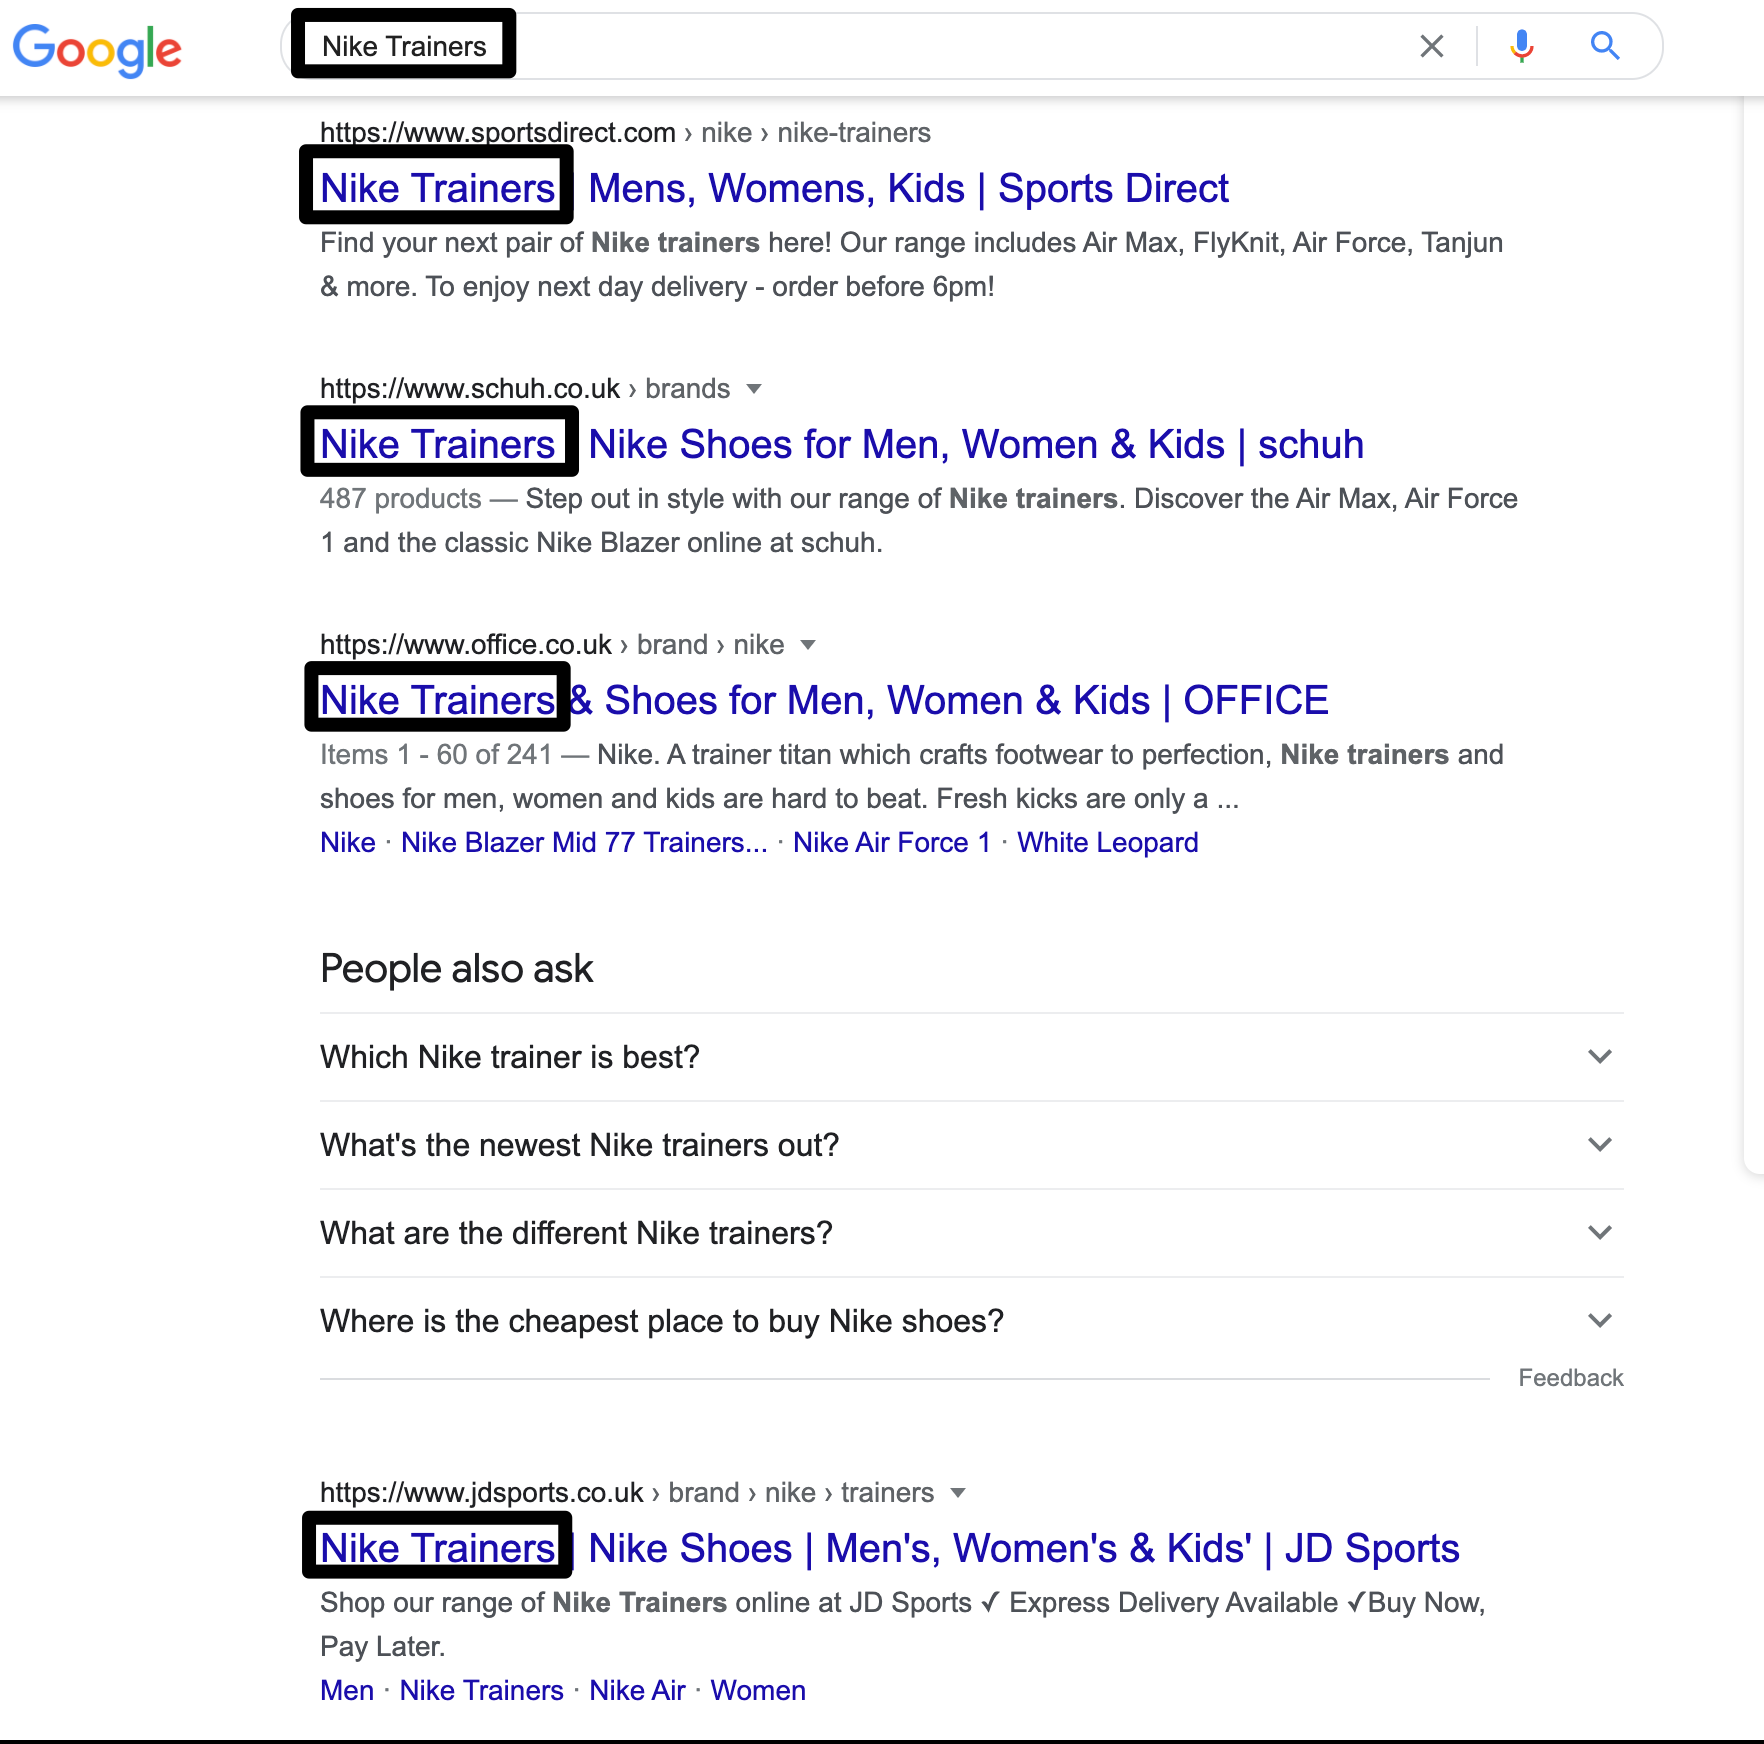 title tags within a search result on Google